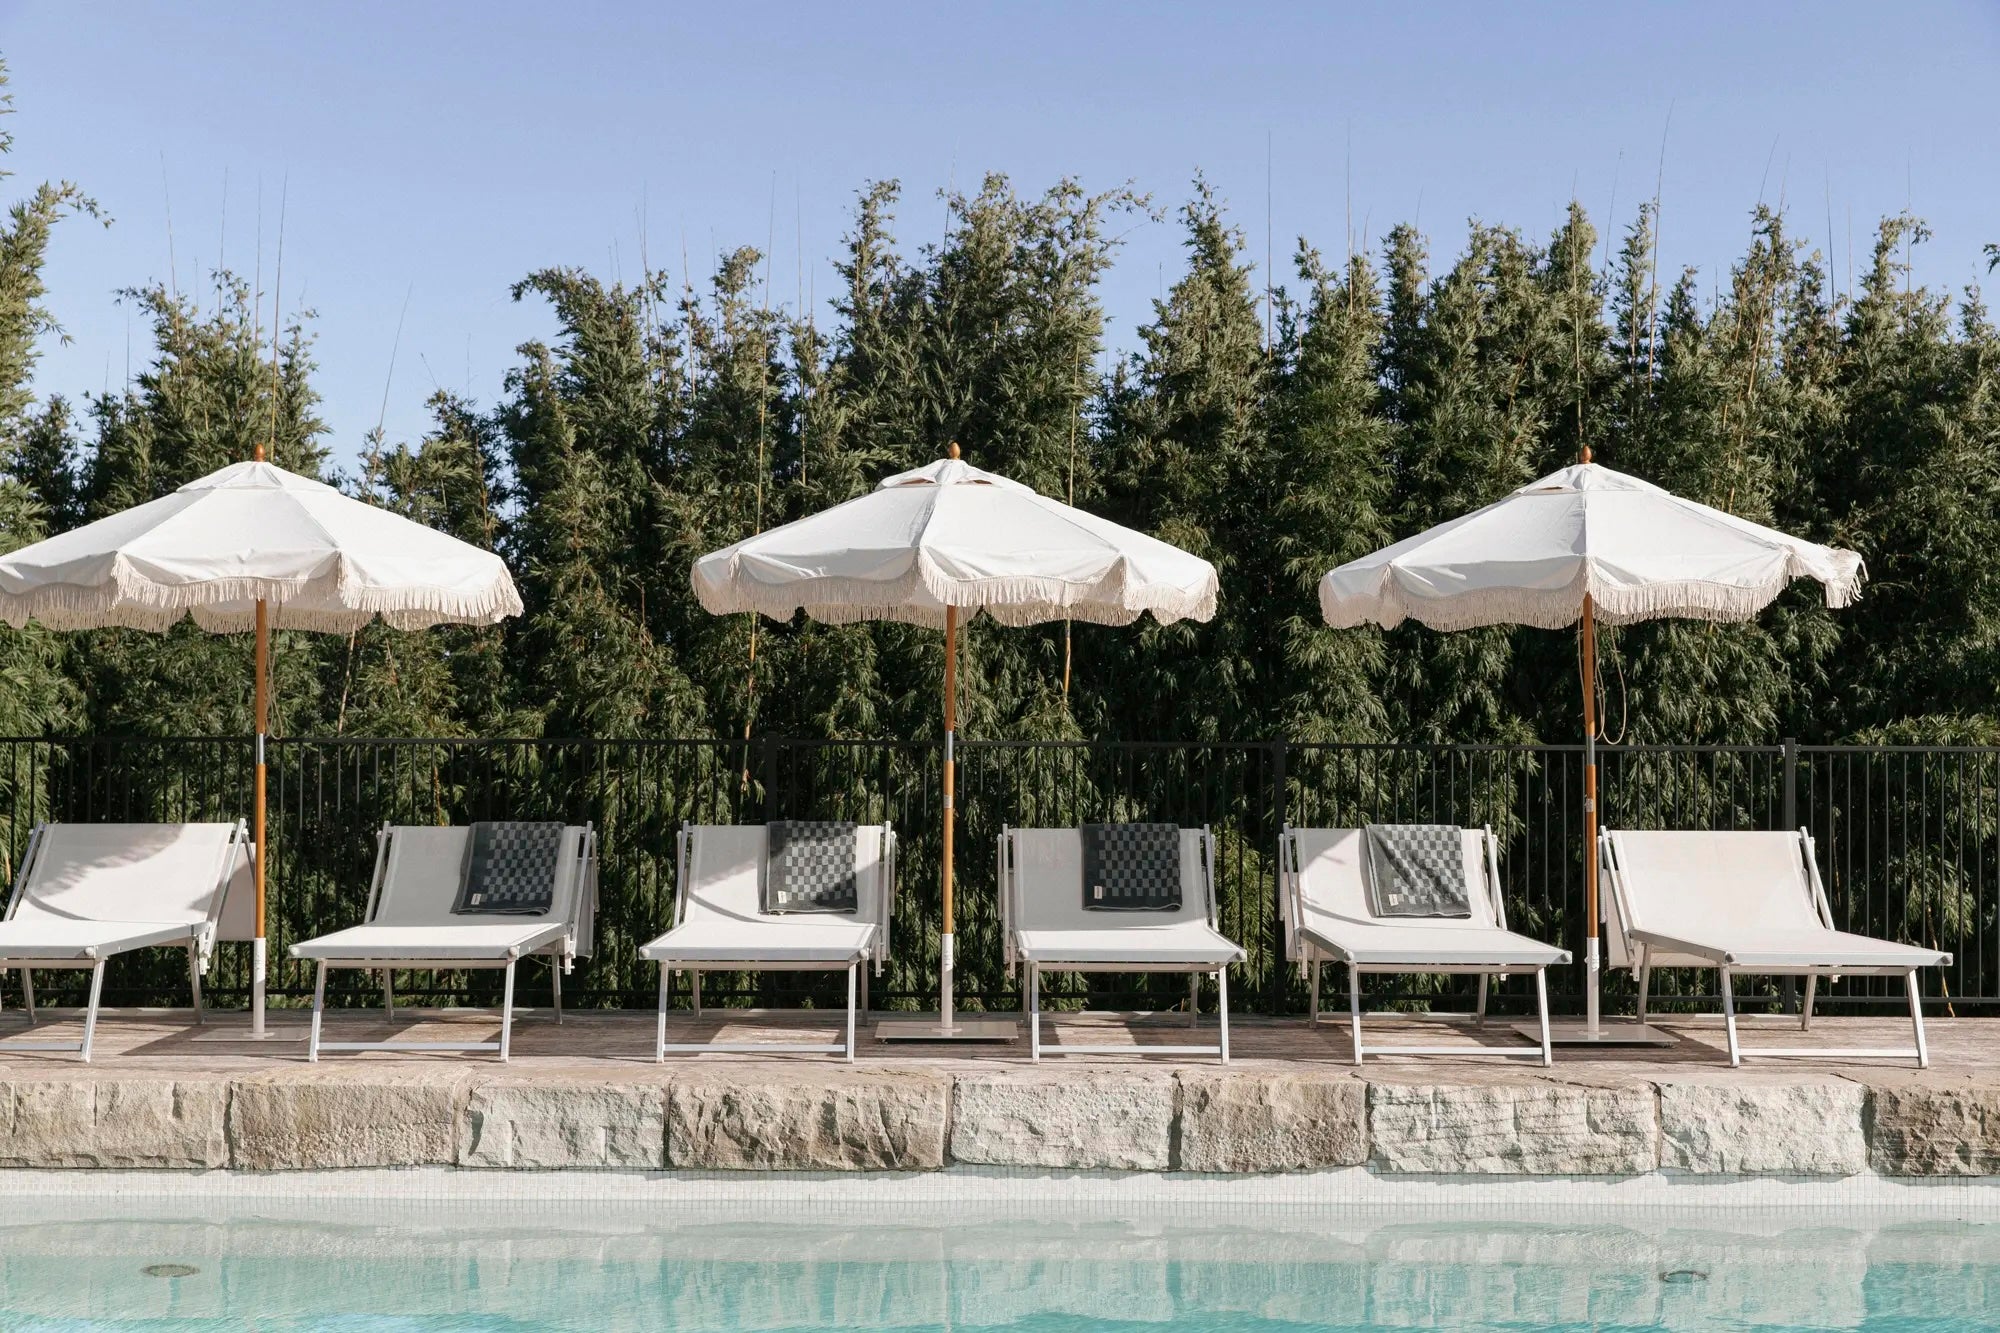 White market umbrellas by a pool with sun lounger chairs